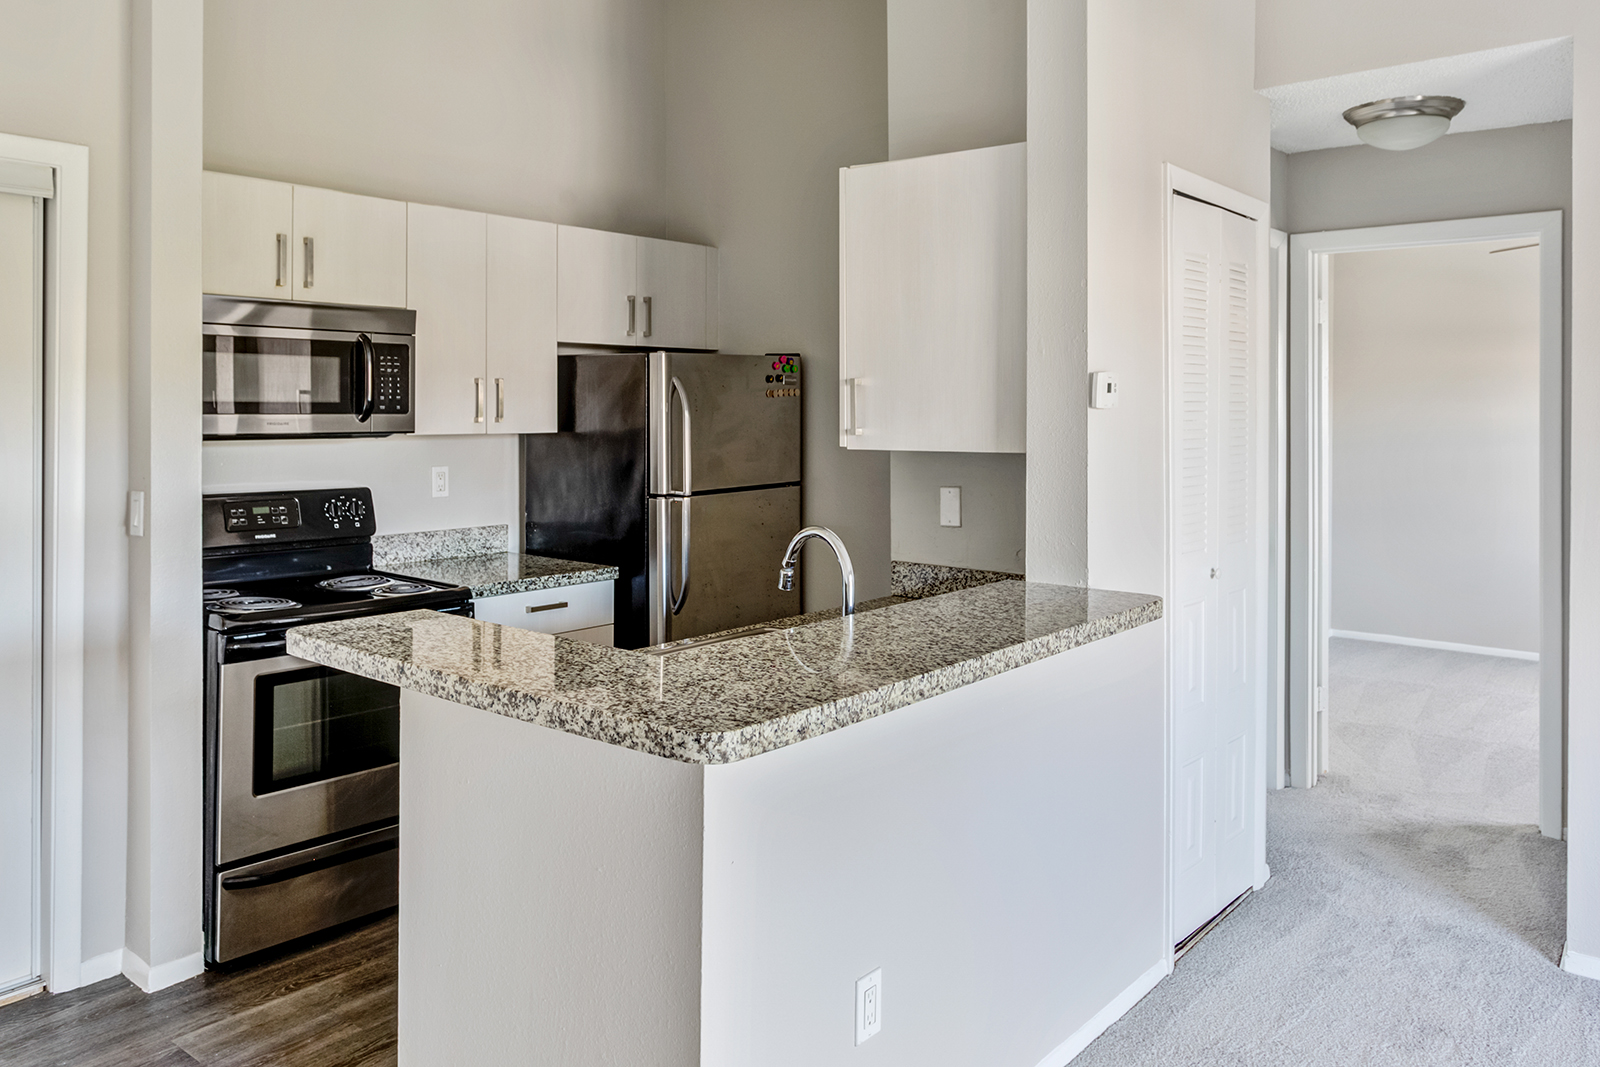 luxury key west apartment kitchen with stainless steel appliances and white cabinets